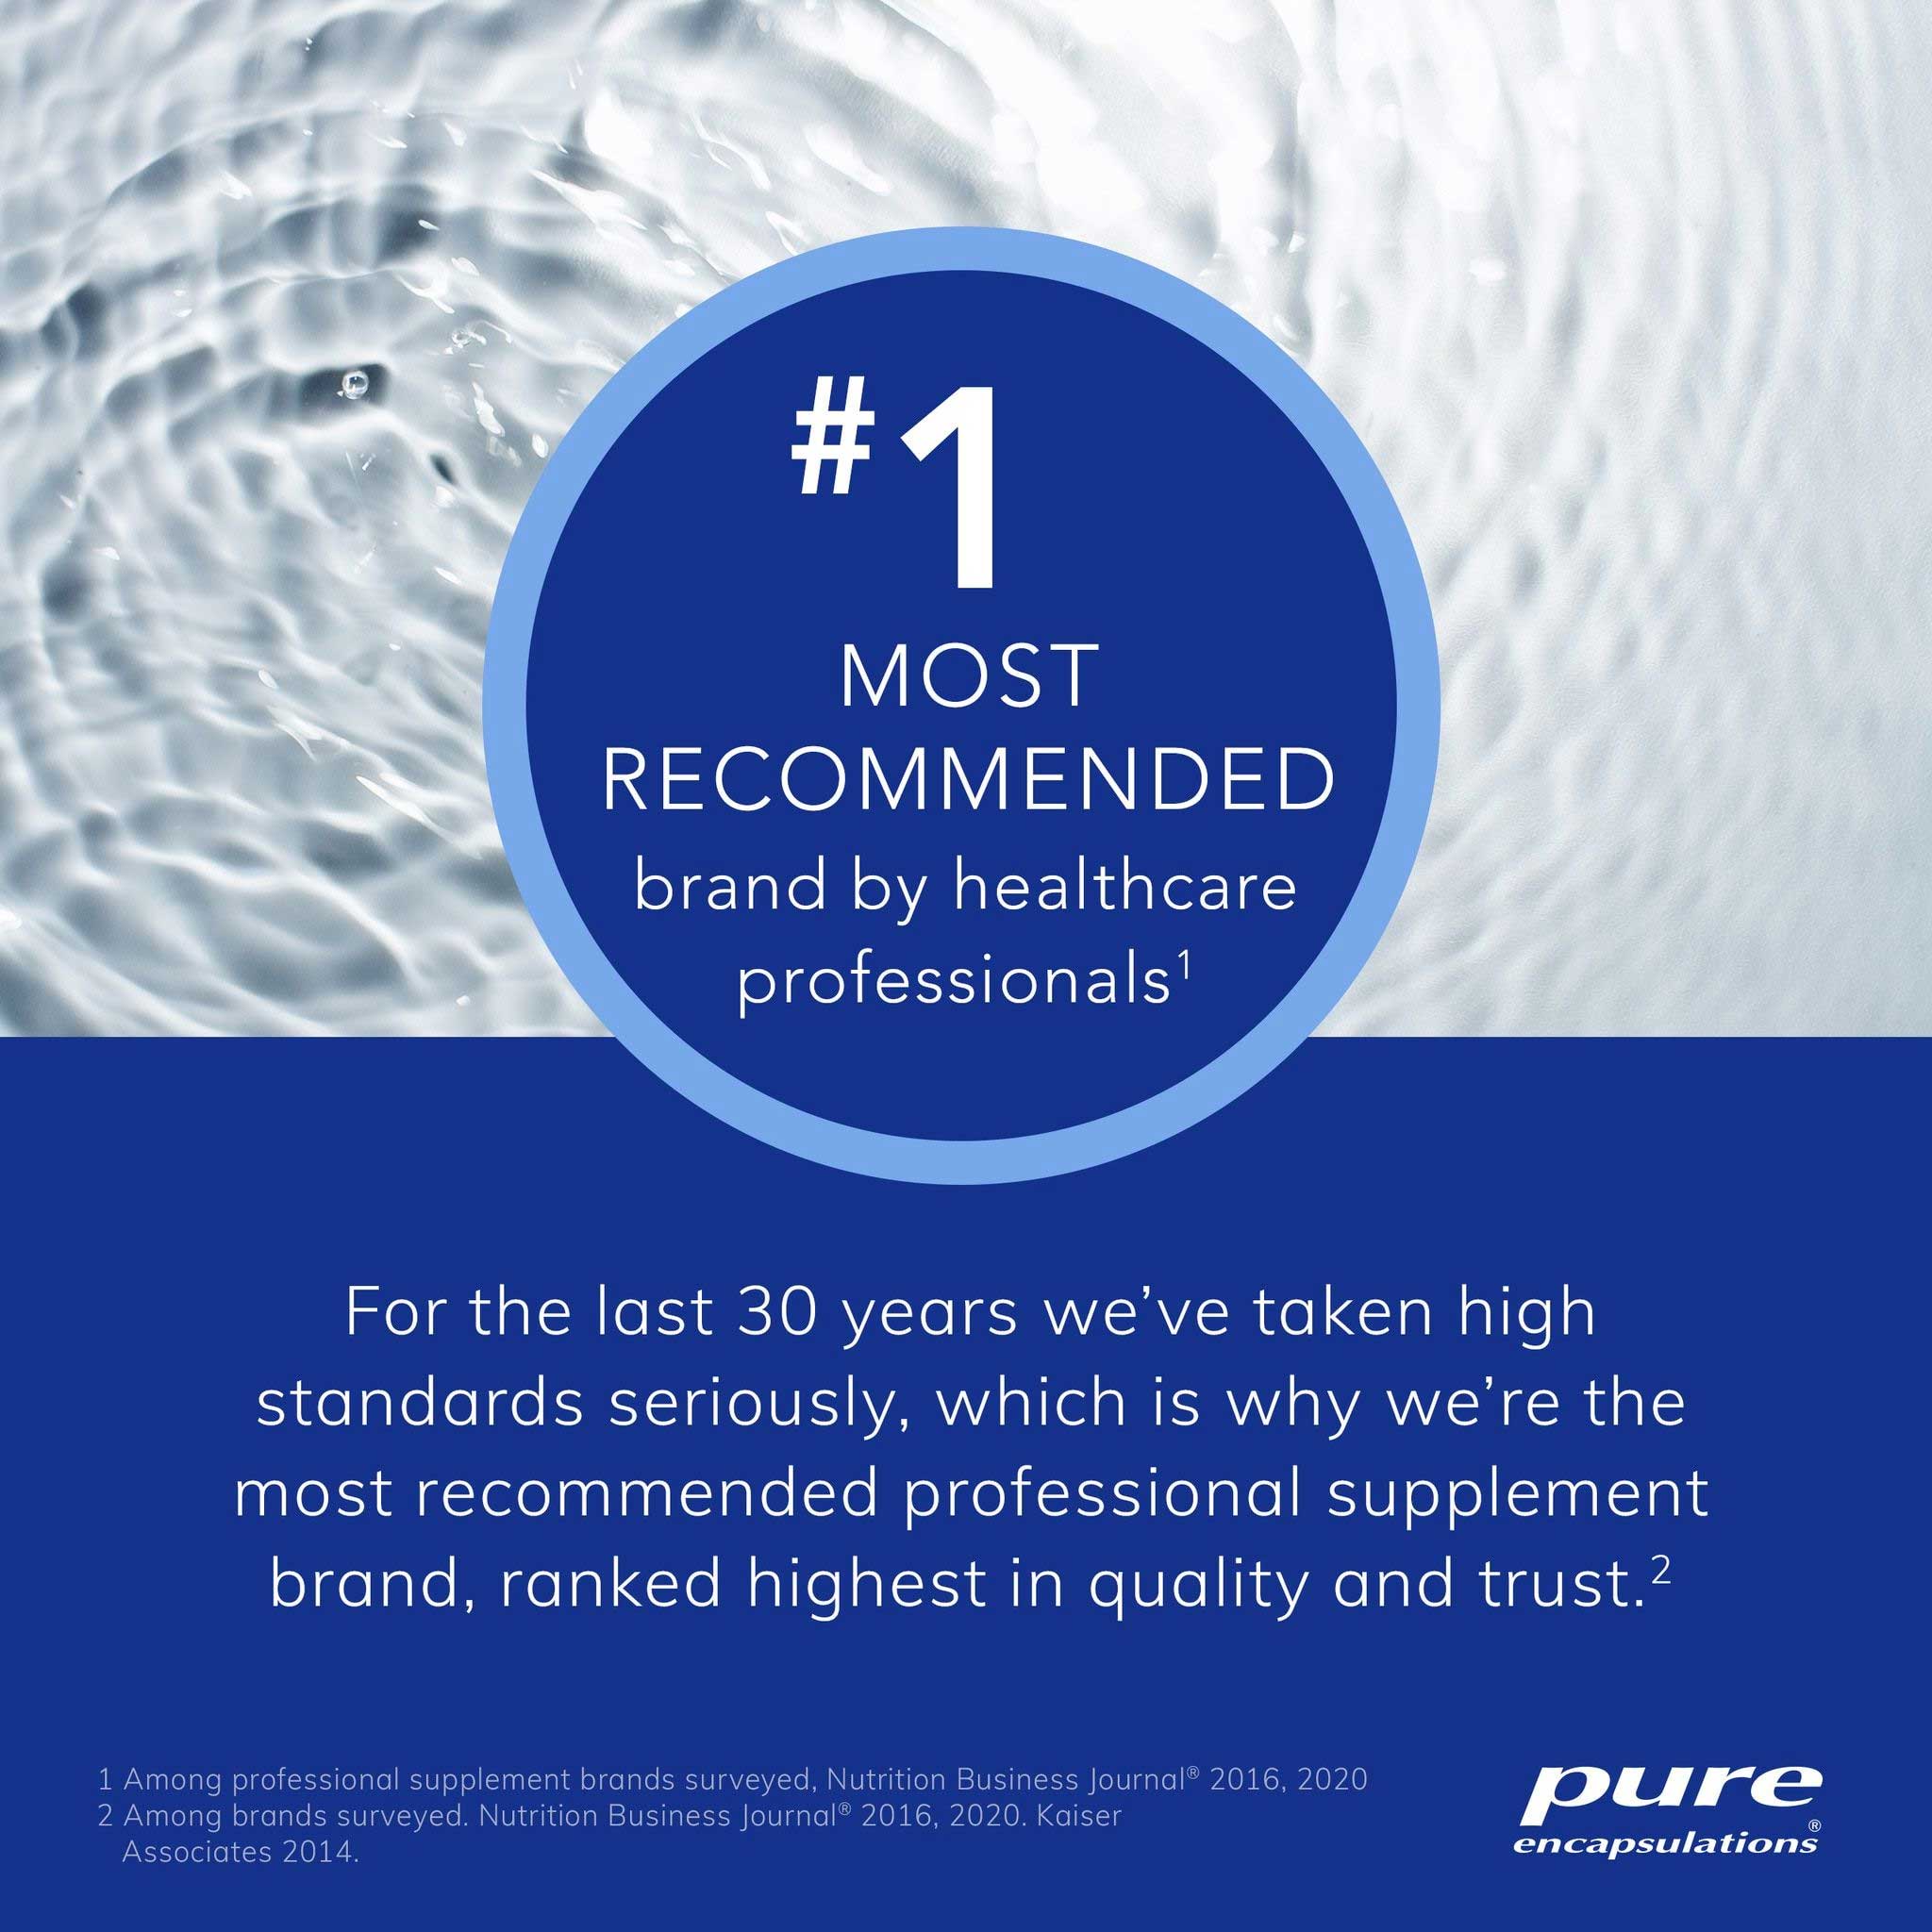 Pure Encapsulations VisionPro EPA/DHA/GLA Most Recommended Brand